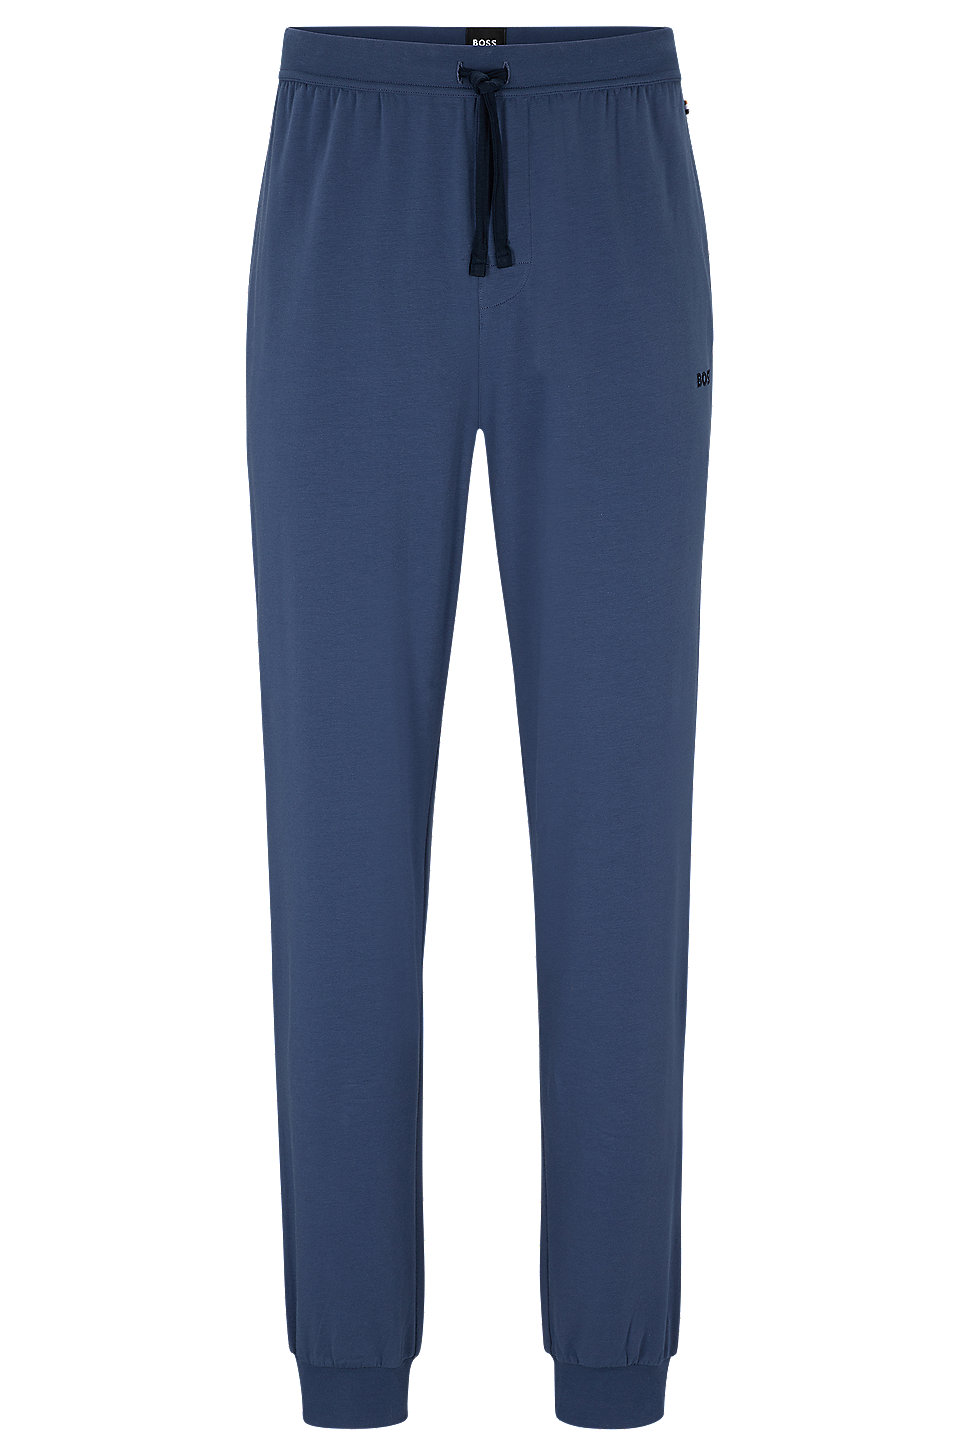 BOSS - Stretch-cotton tracksuit bottoms with embroidered logo